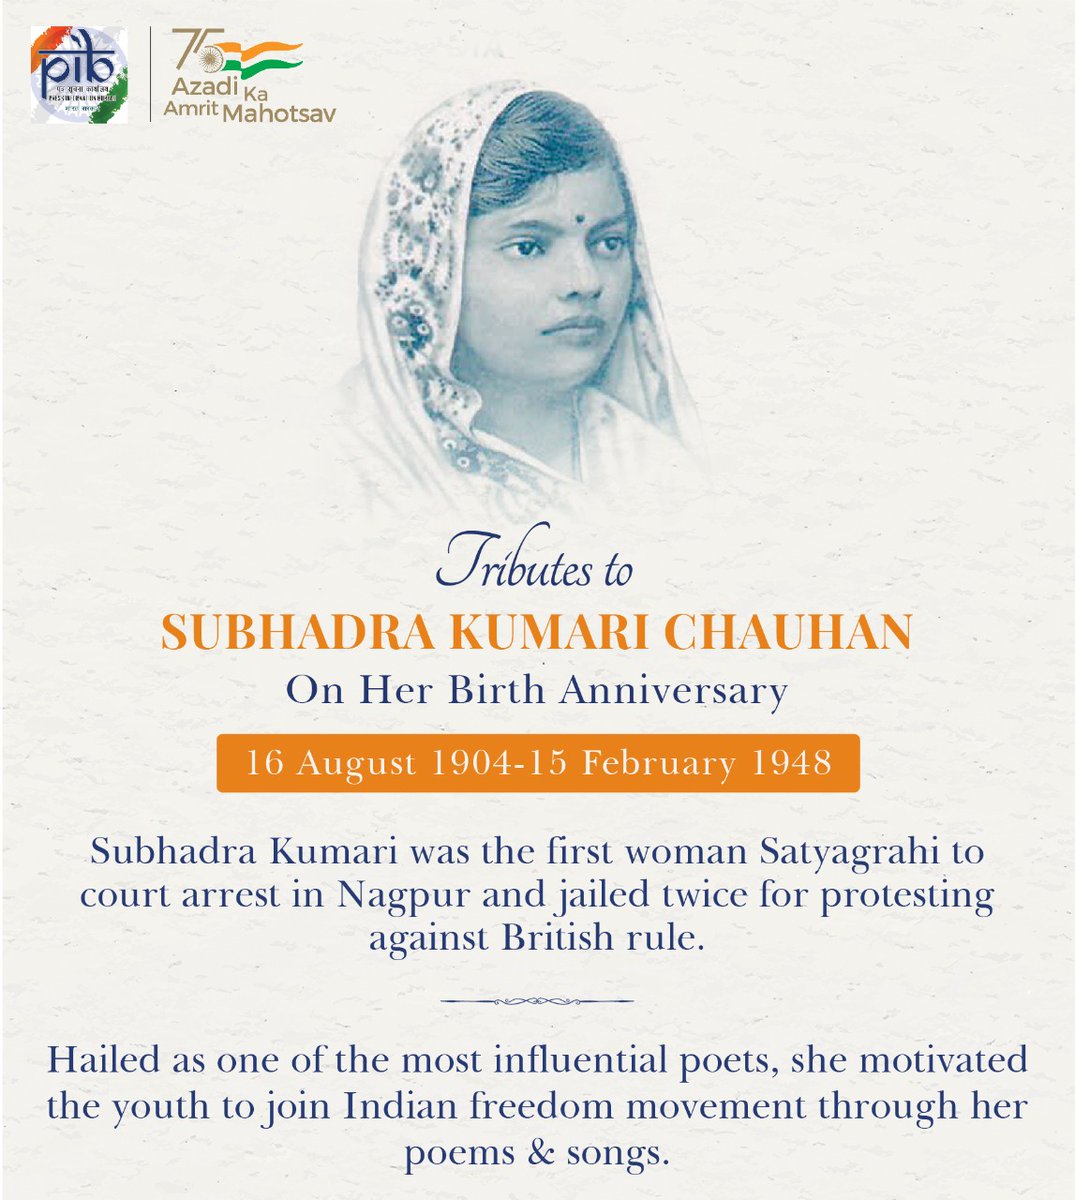 Remembering #SubhadraKumariChauhan on her birth anniversary

She was the first woman Satyagrahi to court arrest in Nagpur and jailed twice for her involvement in protests against British rule in 1923 and 1942

#AmritMahotsav